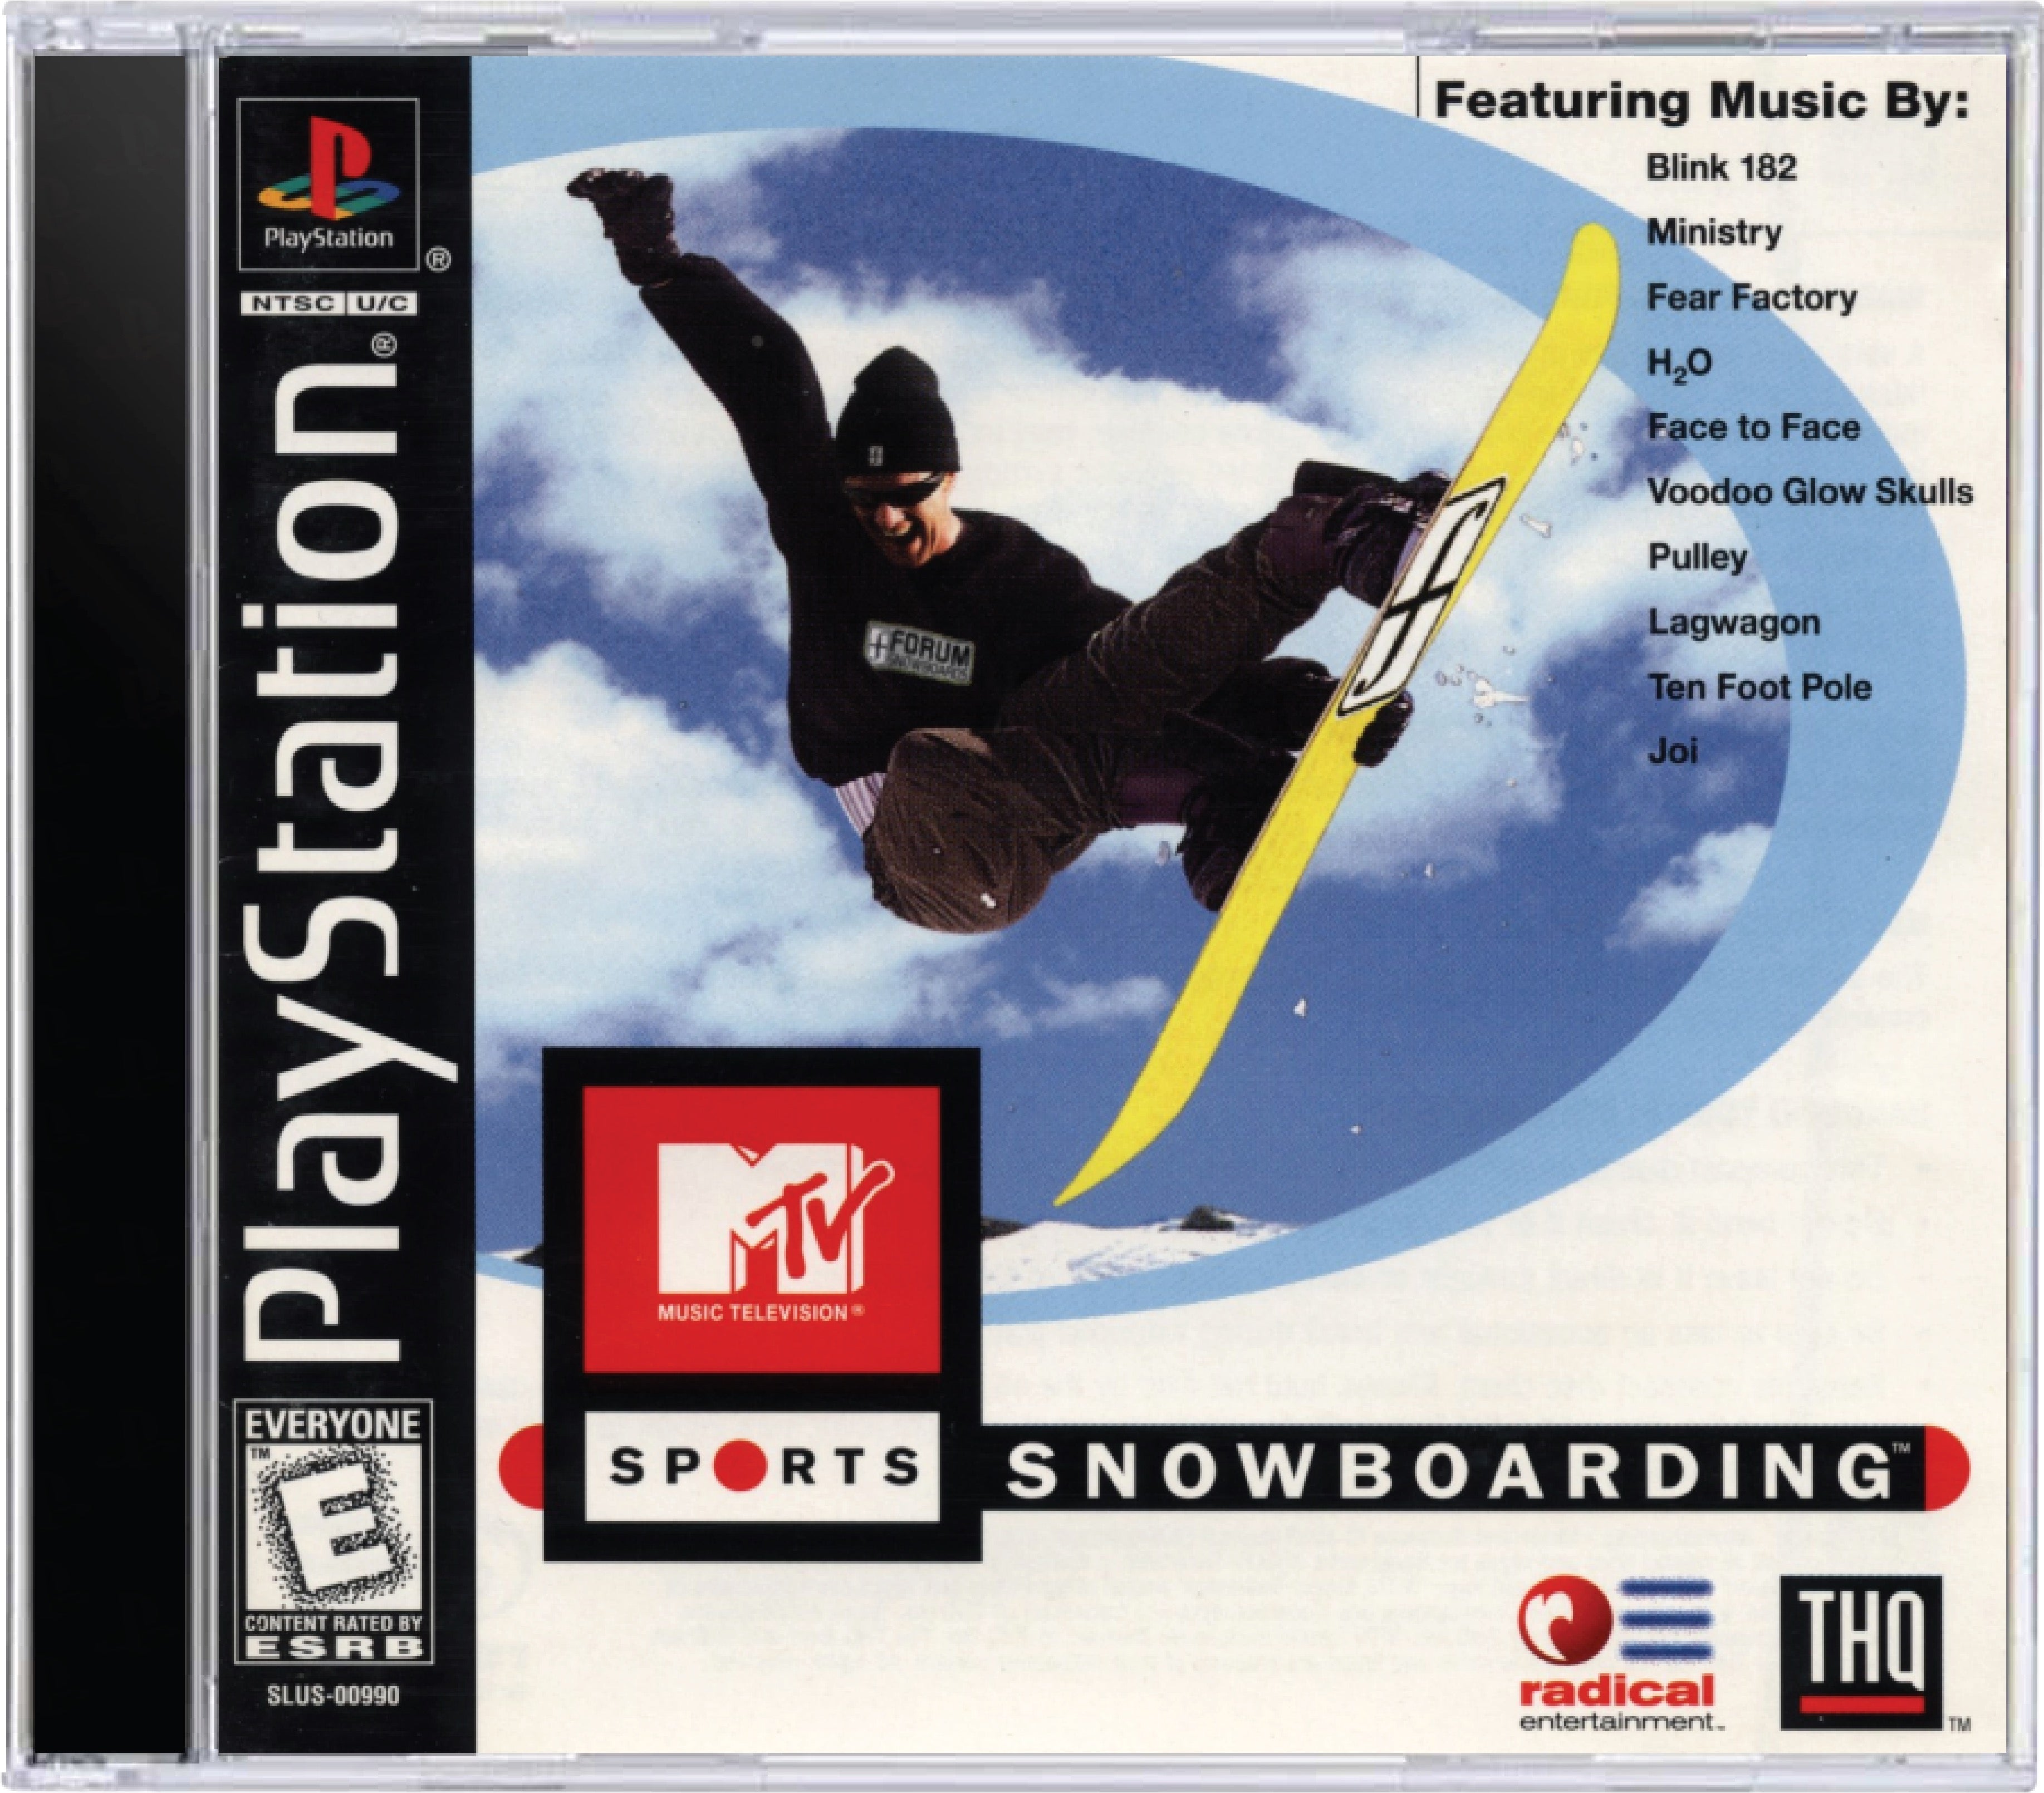 MTV Sports Snowboarding Cover Art and Product Photo